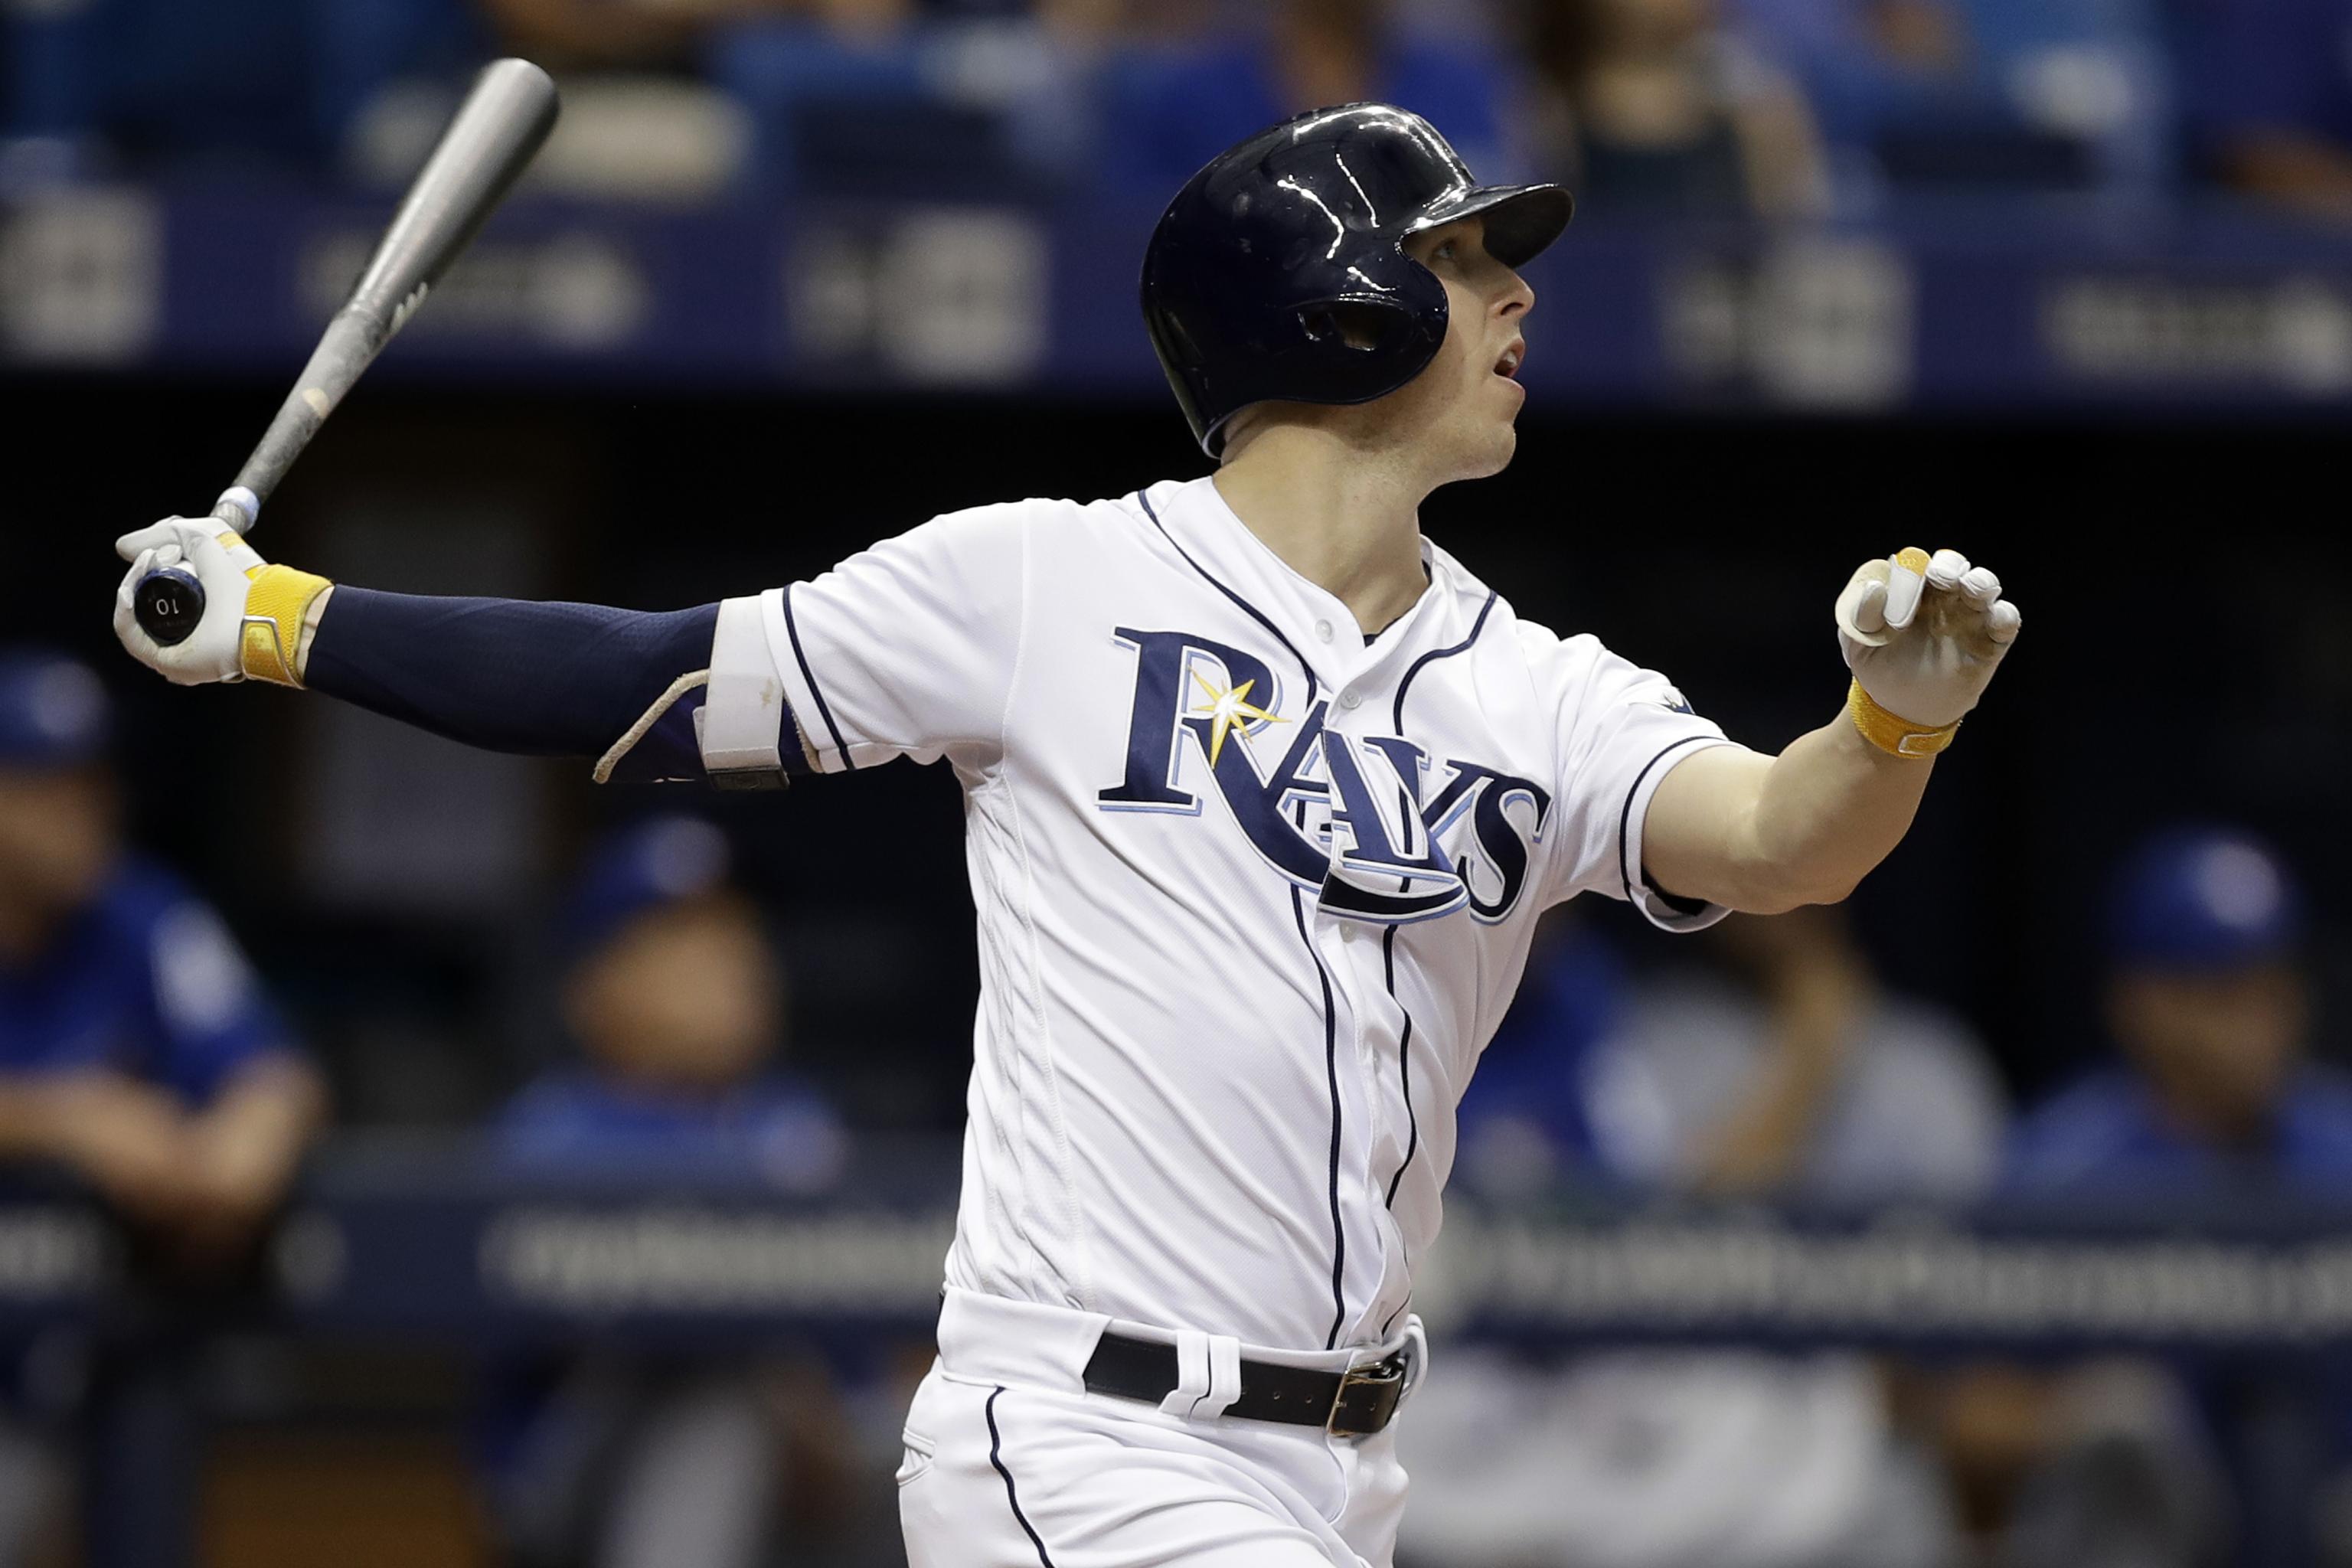 Tampa Bay Rays - C.J. Cron homered while Smith, D-Rob, Field all